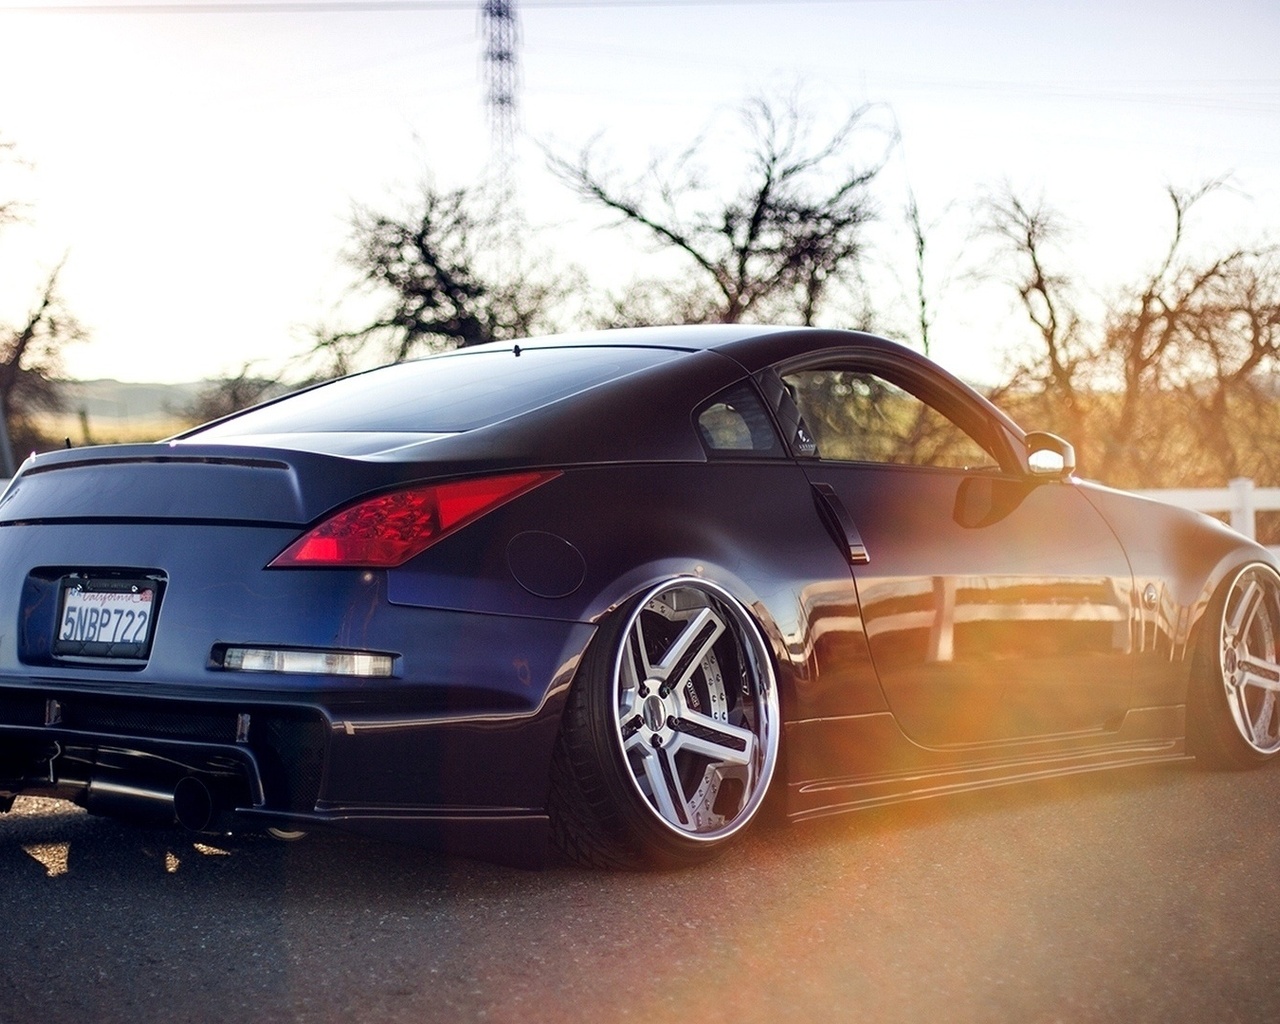 car, 350z, stance, twin turbo, nissan, tuning, , 